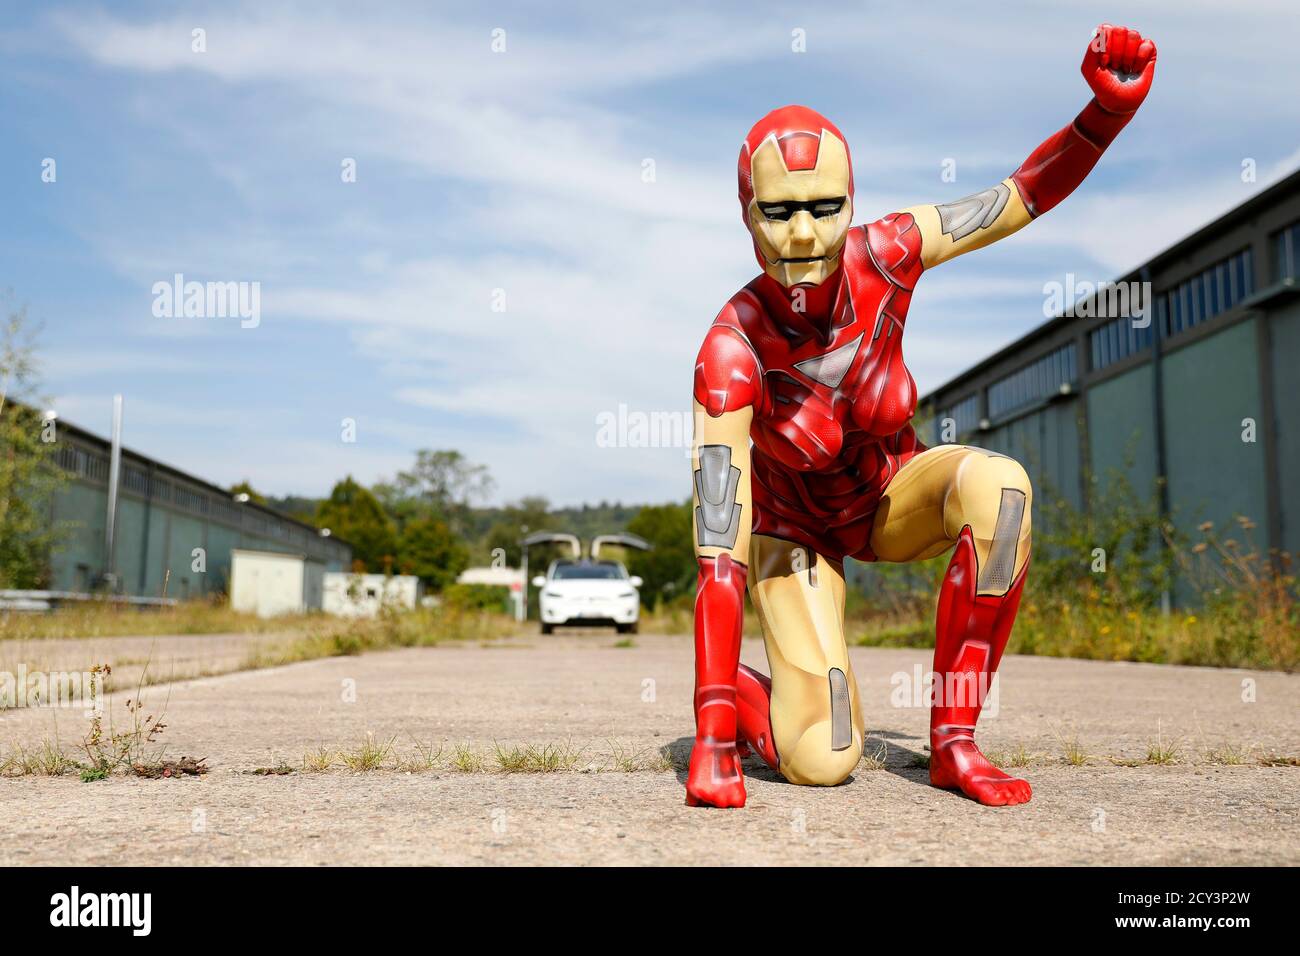 GEEK ART - Bodypainting and Transformaking: Iron Woman with René-Claire Meinkold at the elektroma site in Hamelin on September 30, 2020 - A project by the photographer Tschiponnique Skupin and the bodypainter Enrico Lein Stock Photo